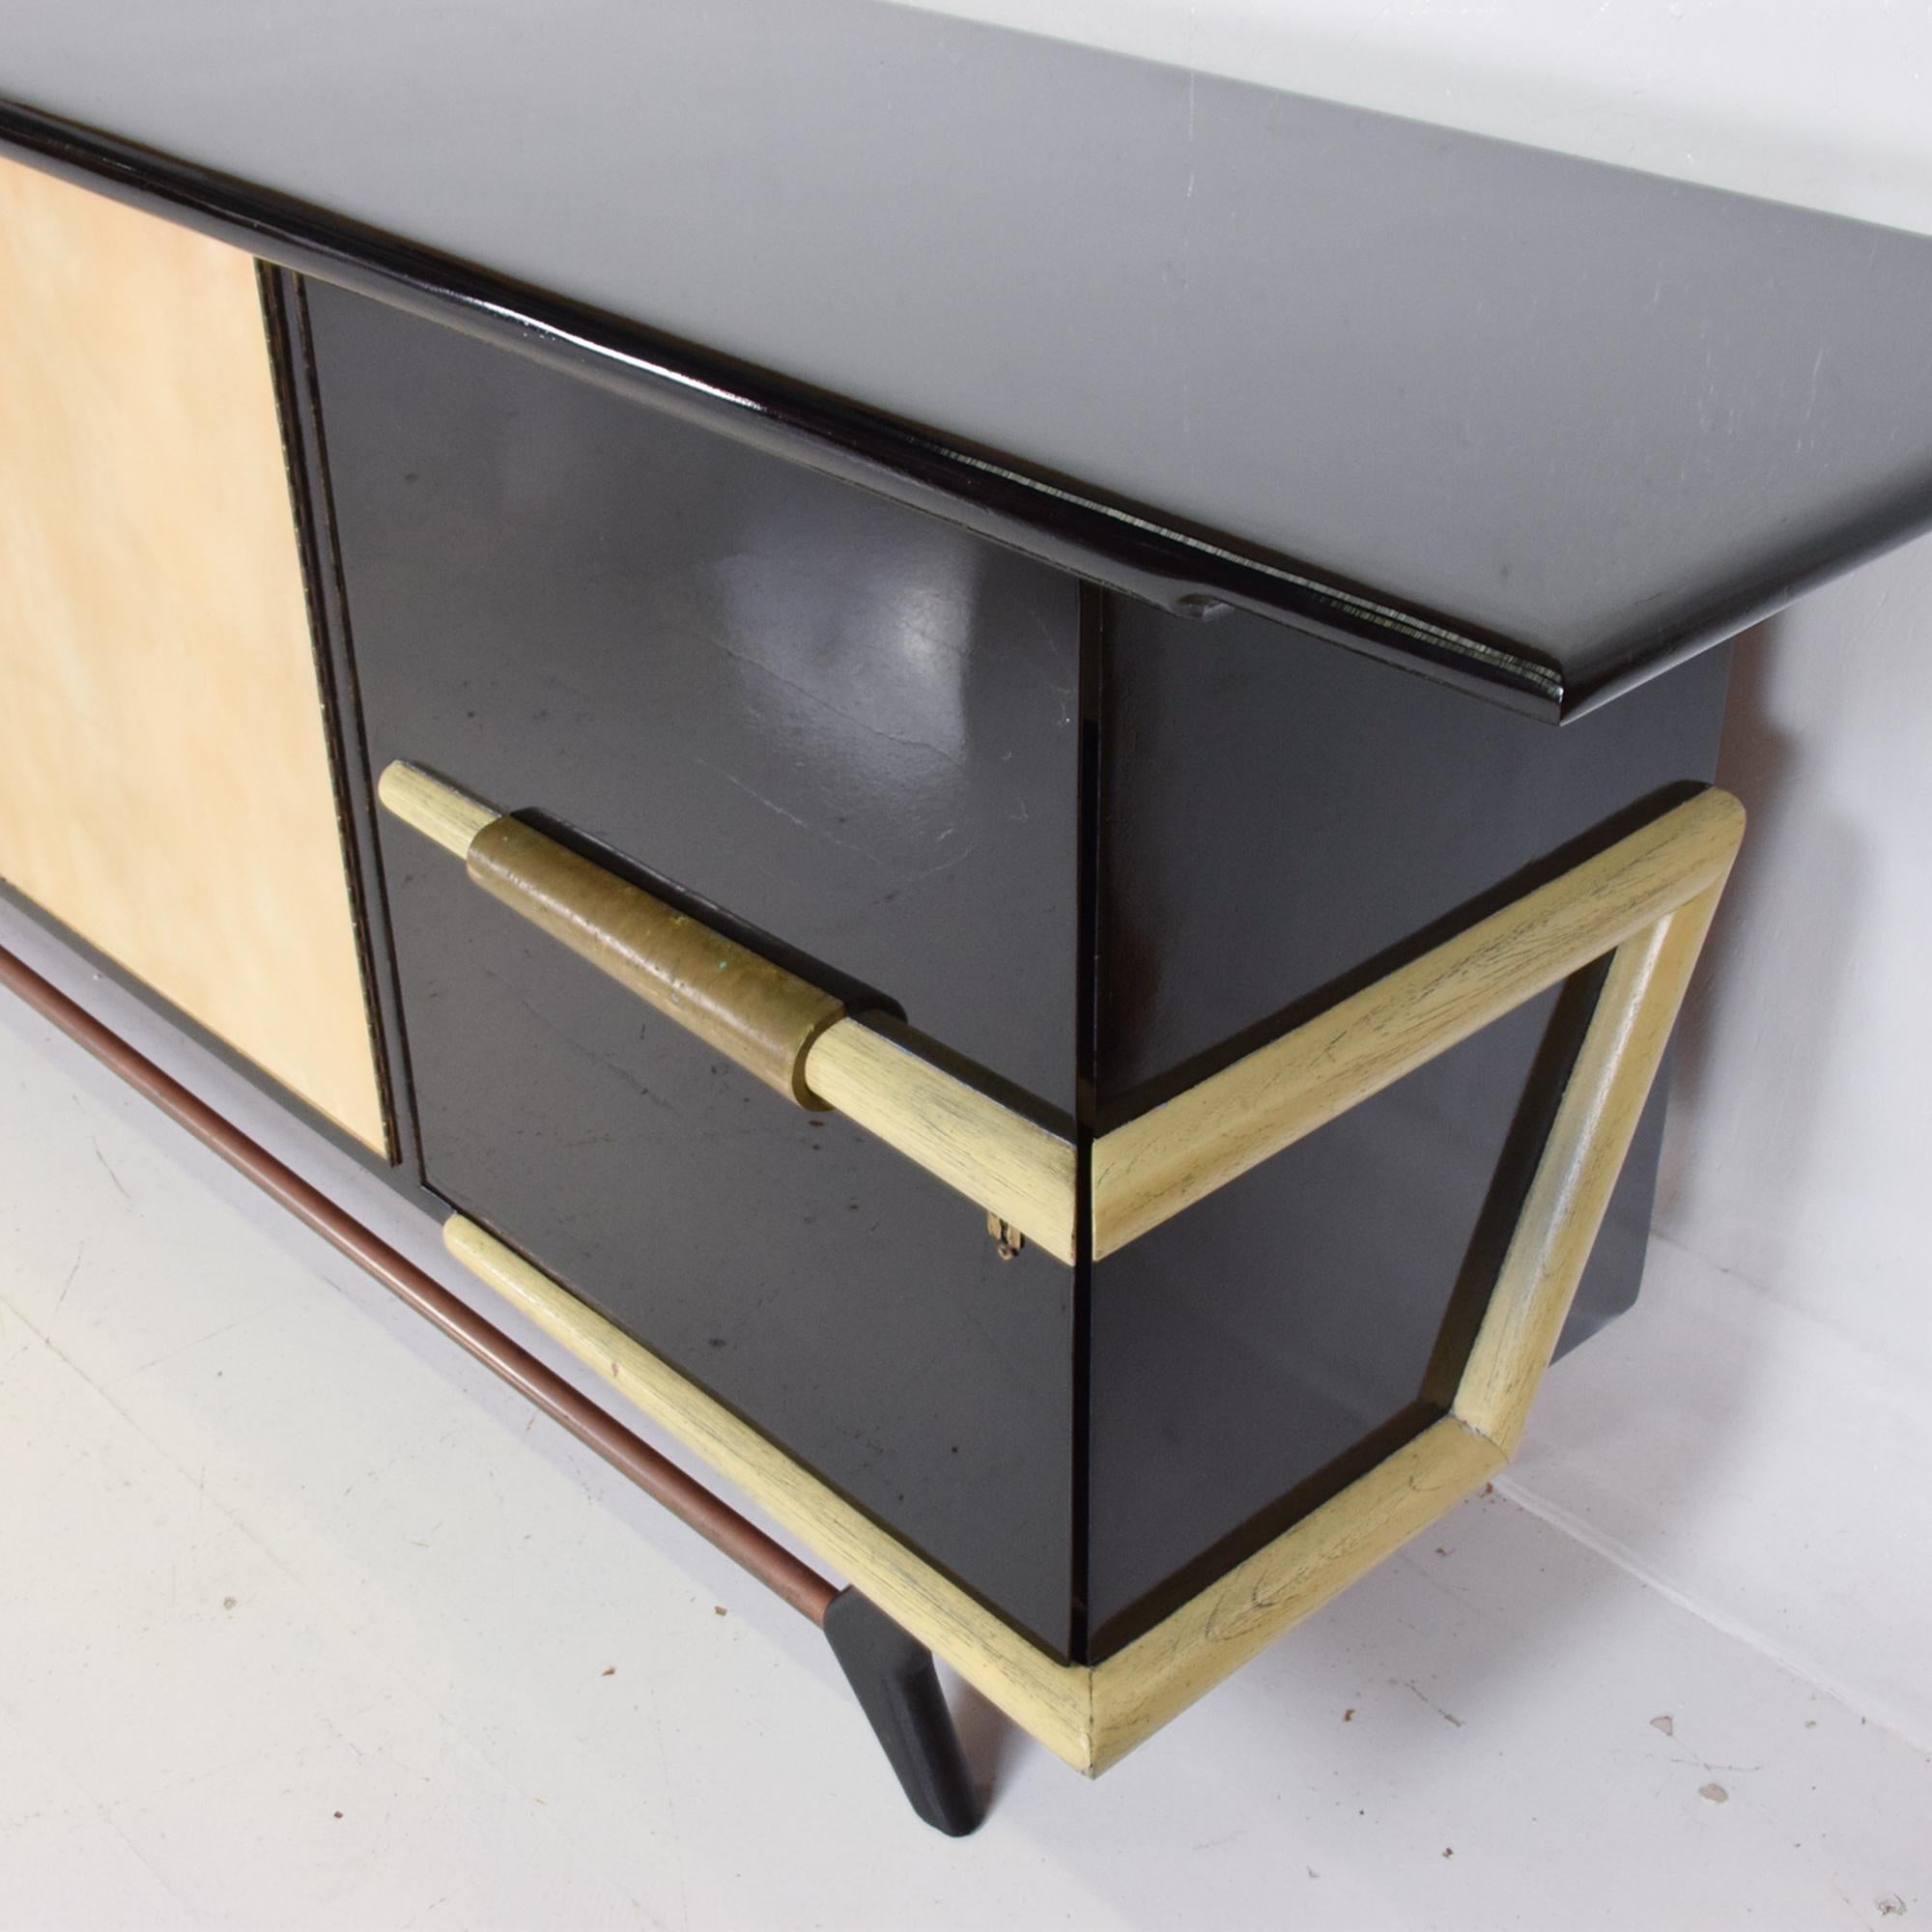 Mexican modernist dramatic long credenza made in mahogany with a custom finish of black glossy lacquer. Made in Mexico, circa 1950s.
Attributed to Eugenio Escudero. Stunning piece of midcentury glamour.
Center doors are covered with goatskin.